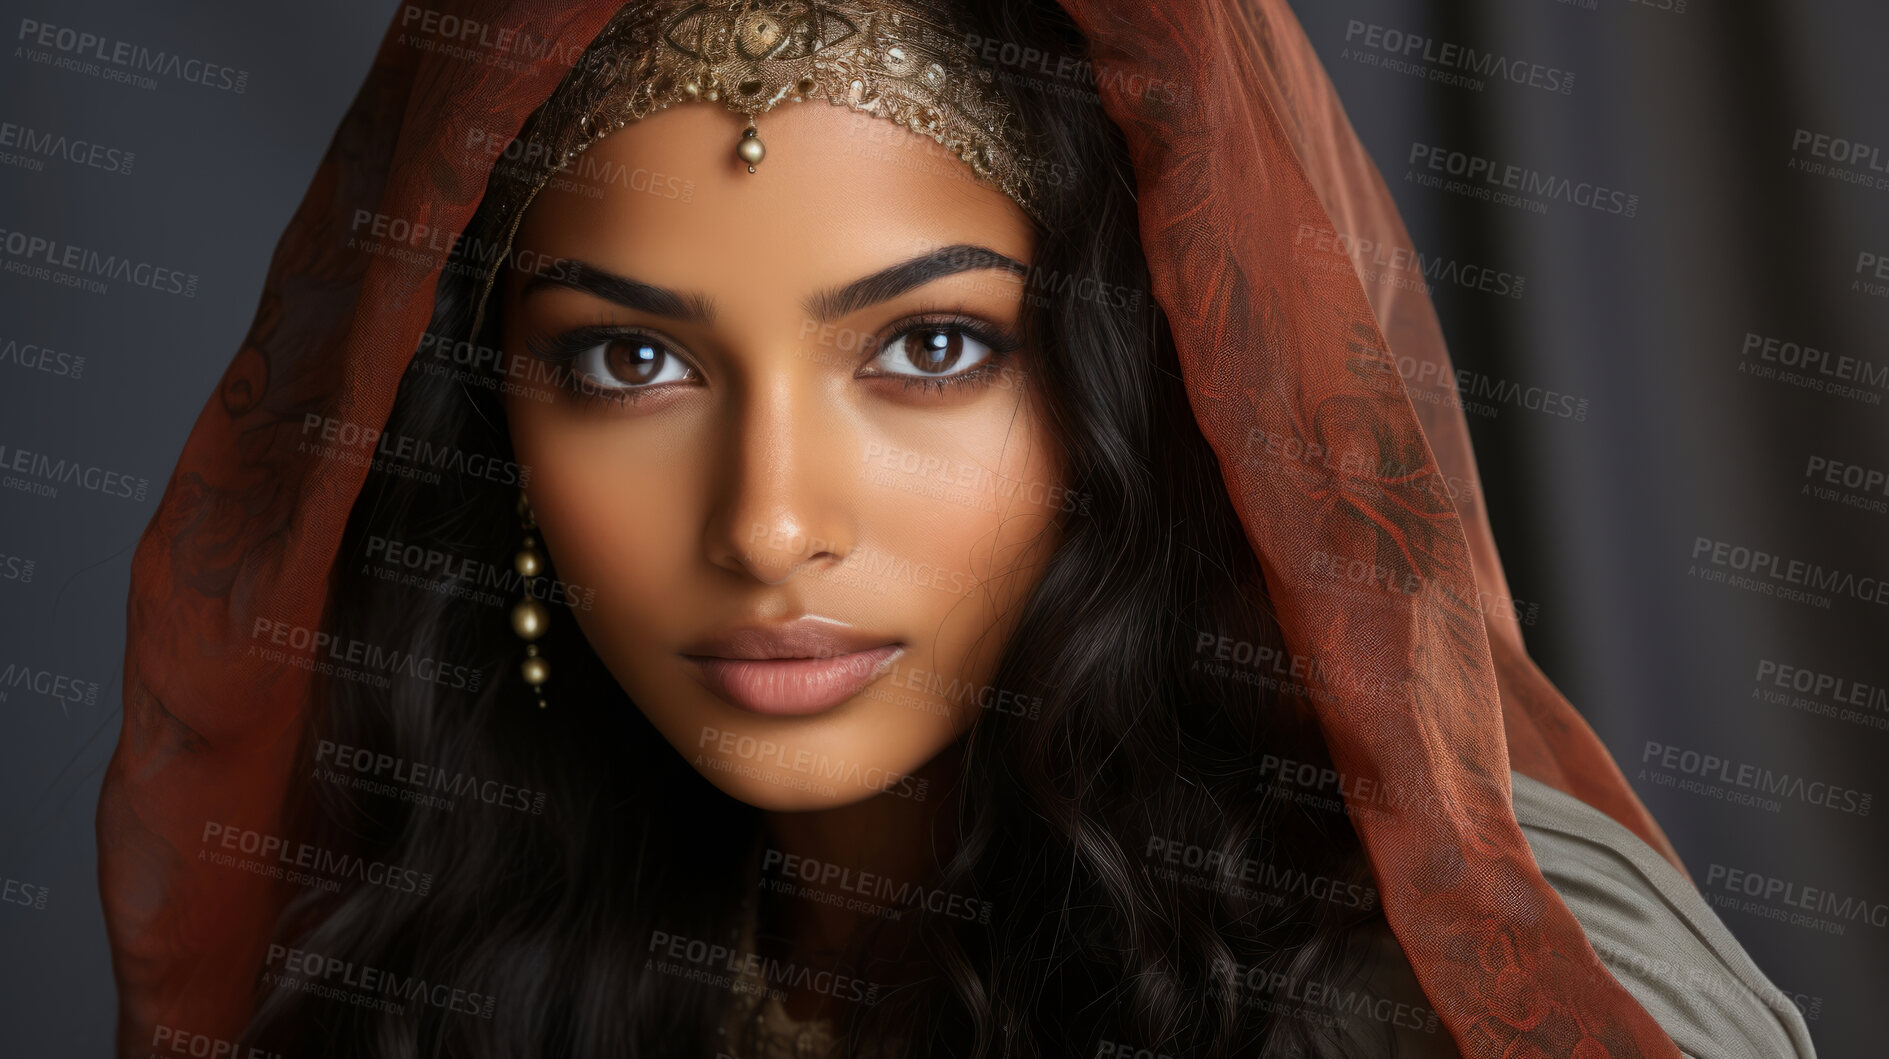 Buy stock photo Portrait of attractive indian woman with traditional accessories. Fashion, editorial concept.